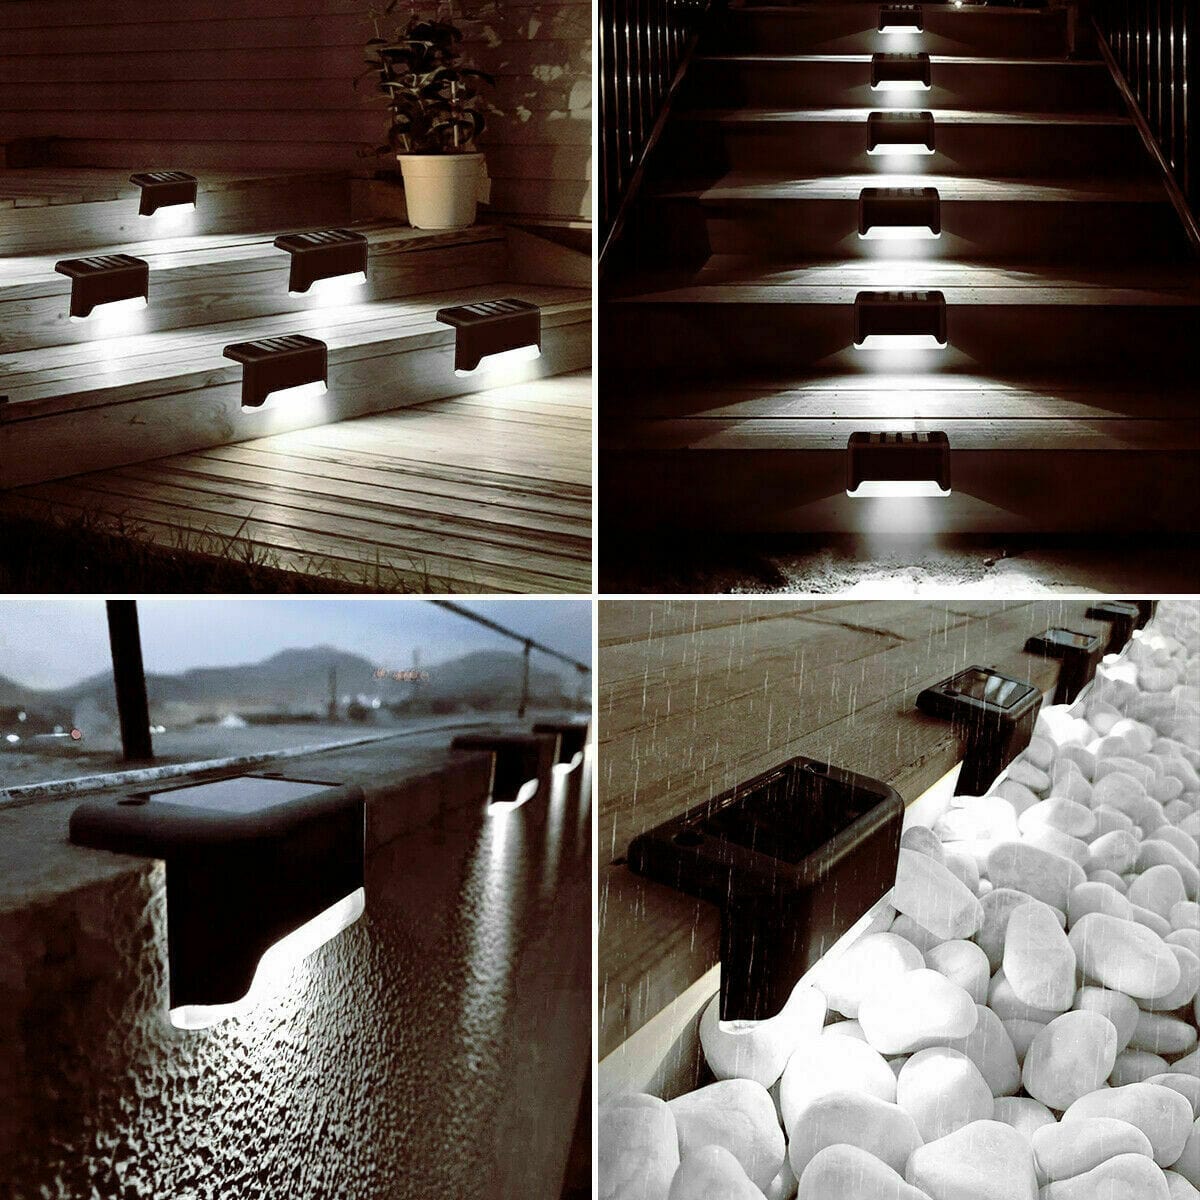 Solar-Powered LED Deck Lights - Outdoor Bright Lighting for Garden, Patio, Pathway, Stairs & Fence